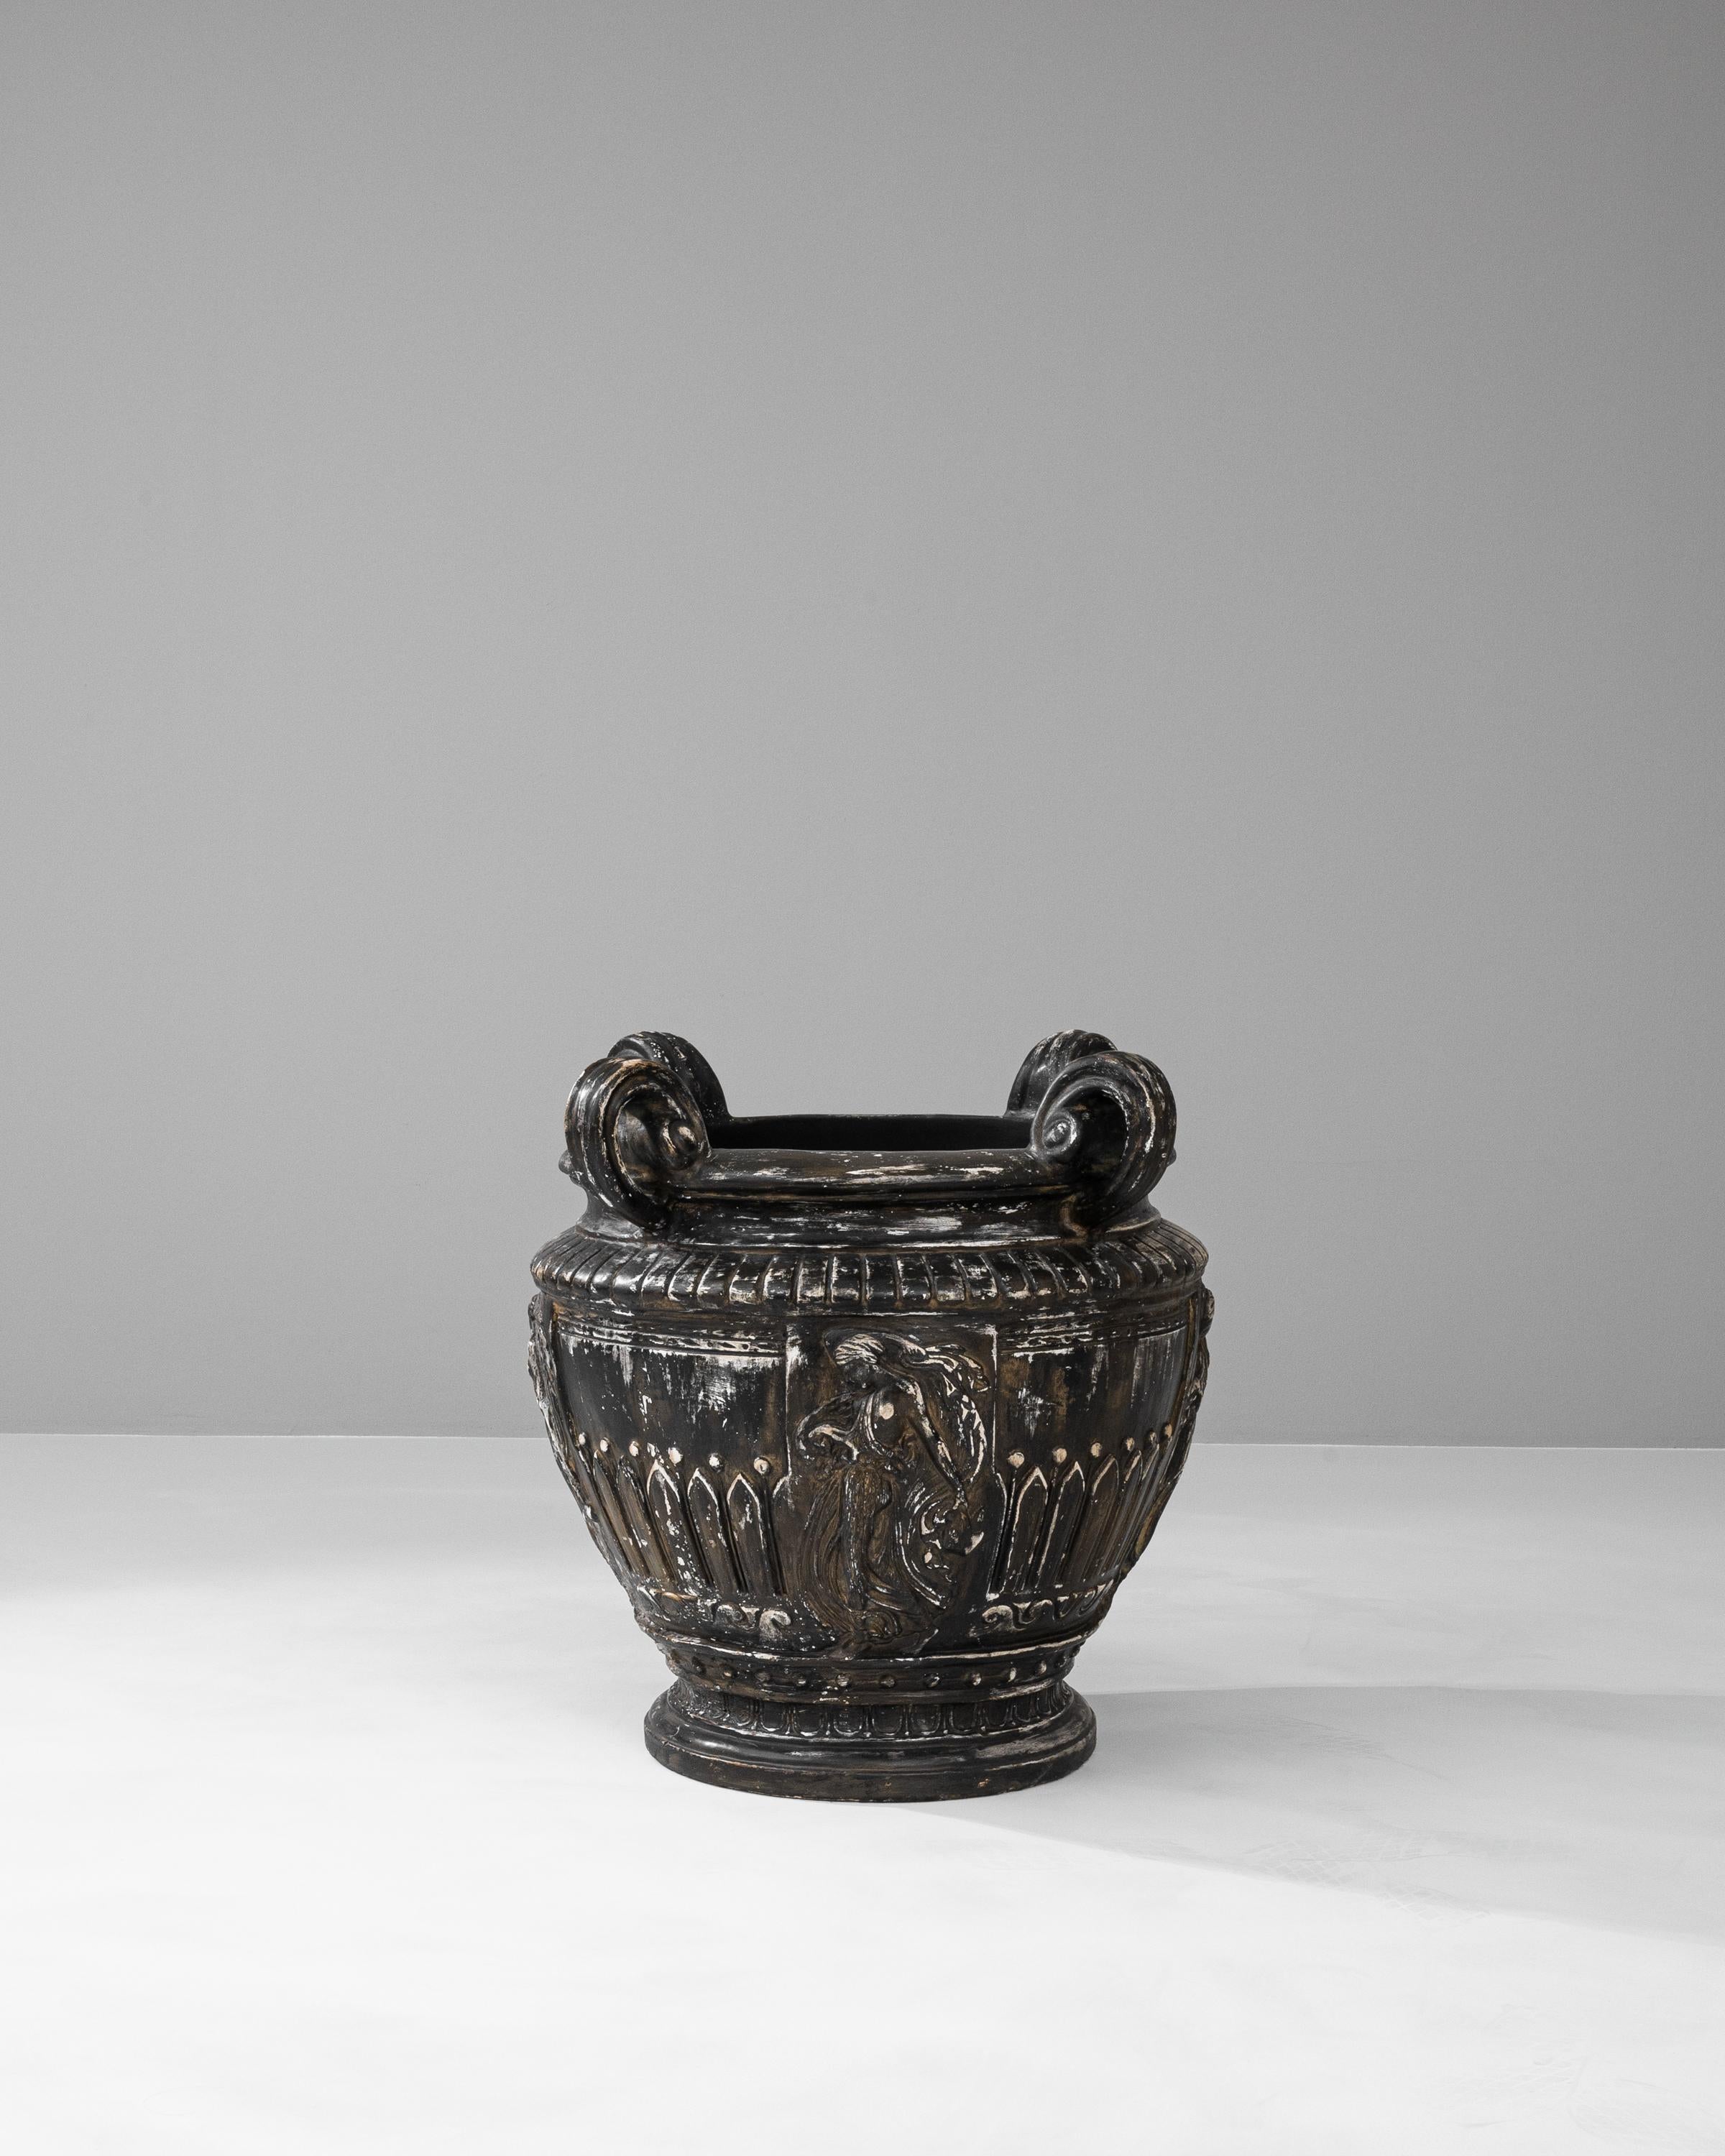 This 1900s French plaster vase is a remarkable relic, showcasing the grandeur and detail of neoclassical design. With its sweeping curves, ornate acanthus leaf motifs, and majestic volute handles, it carries the air of an archaeological treasure.